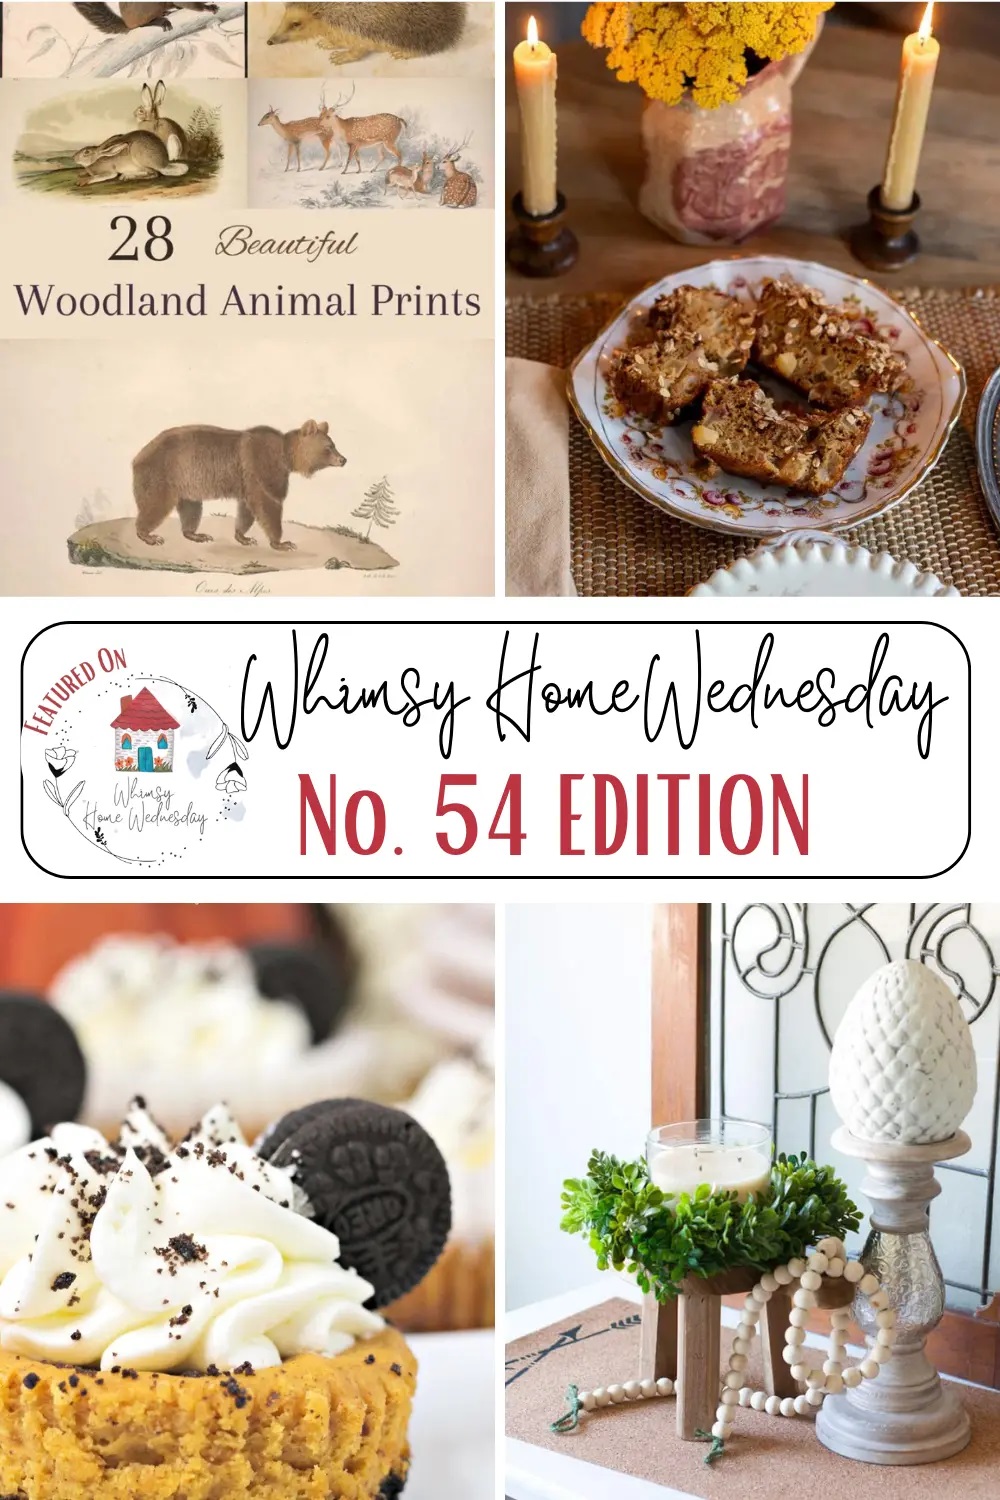 Join us on Whimsy Home Wednesday Blog Link Party No. 54 and see host projects, the features from the previous week and link up your posts!